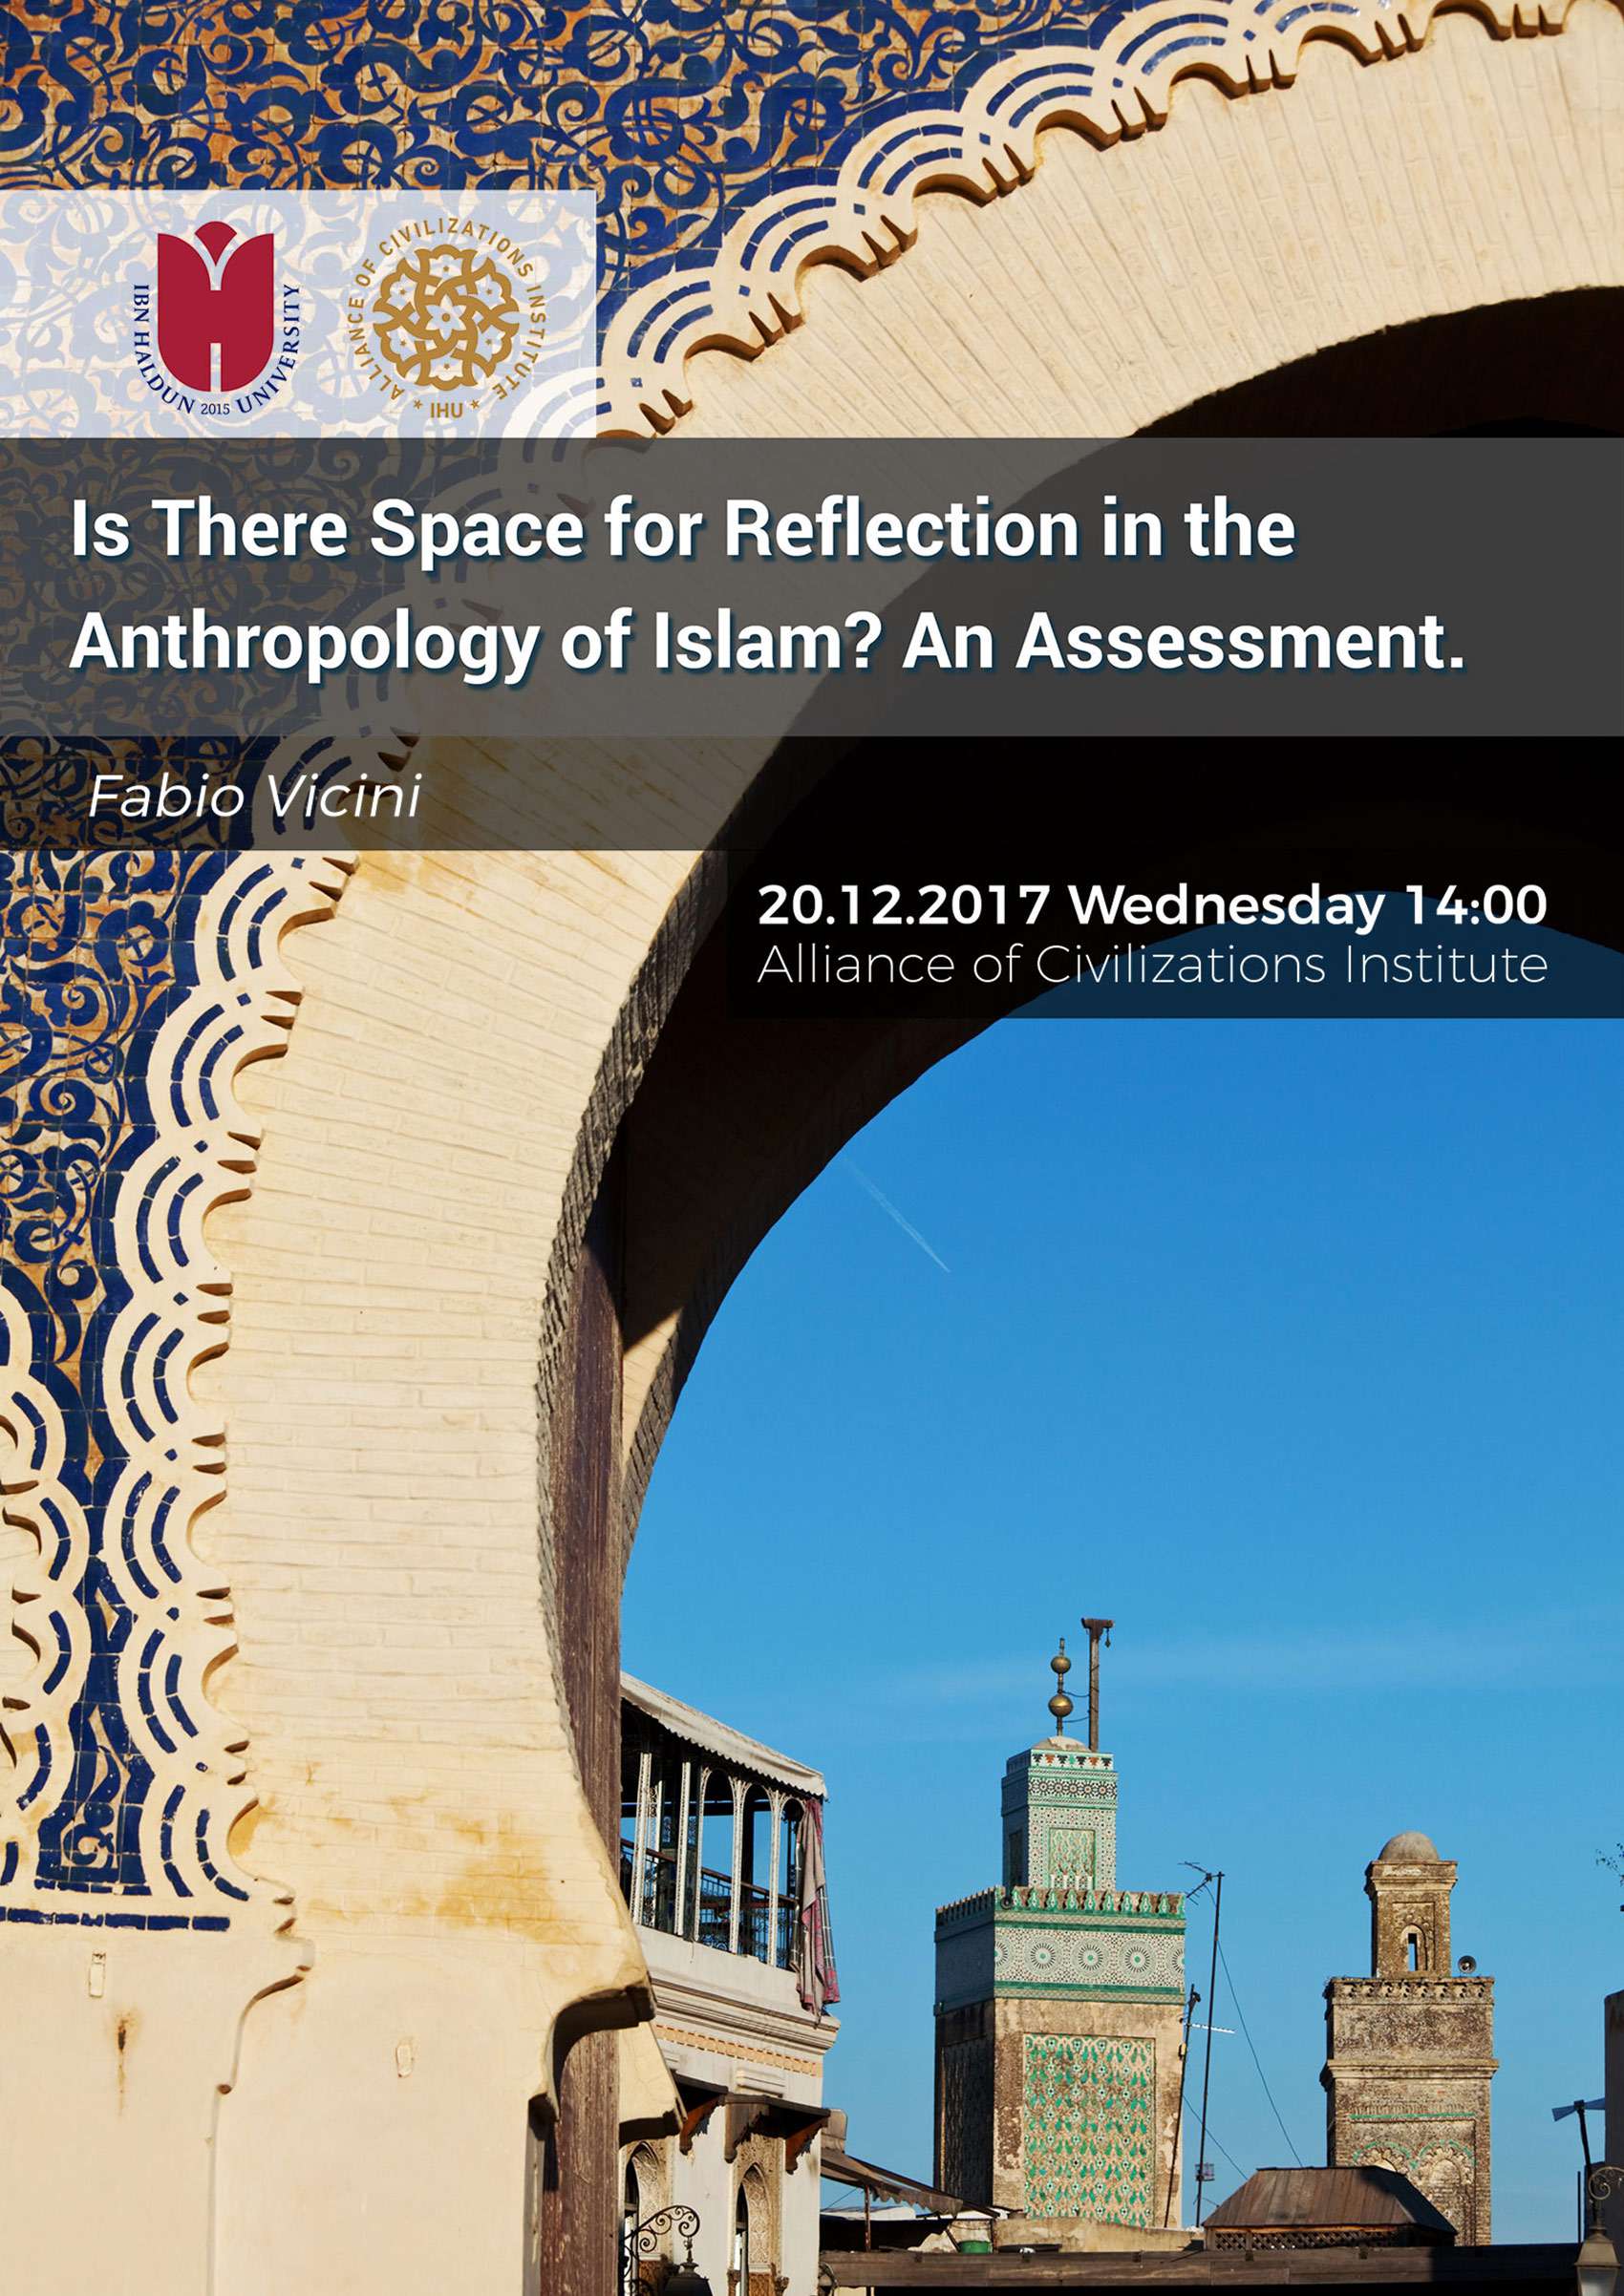 Is There Space for Reflection in the Anthropology of Islam? An Assessment